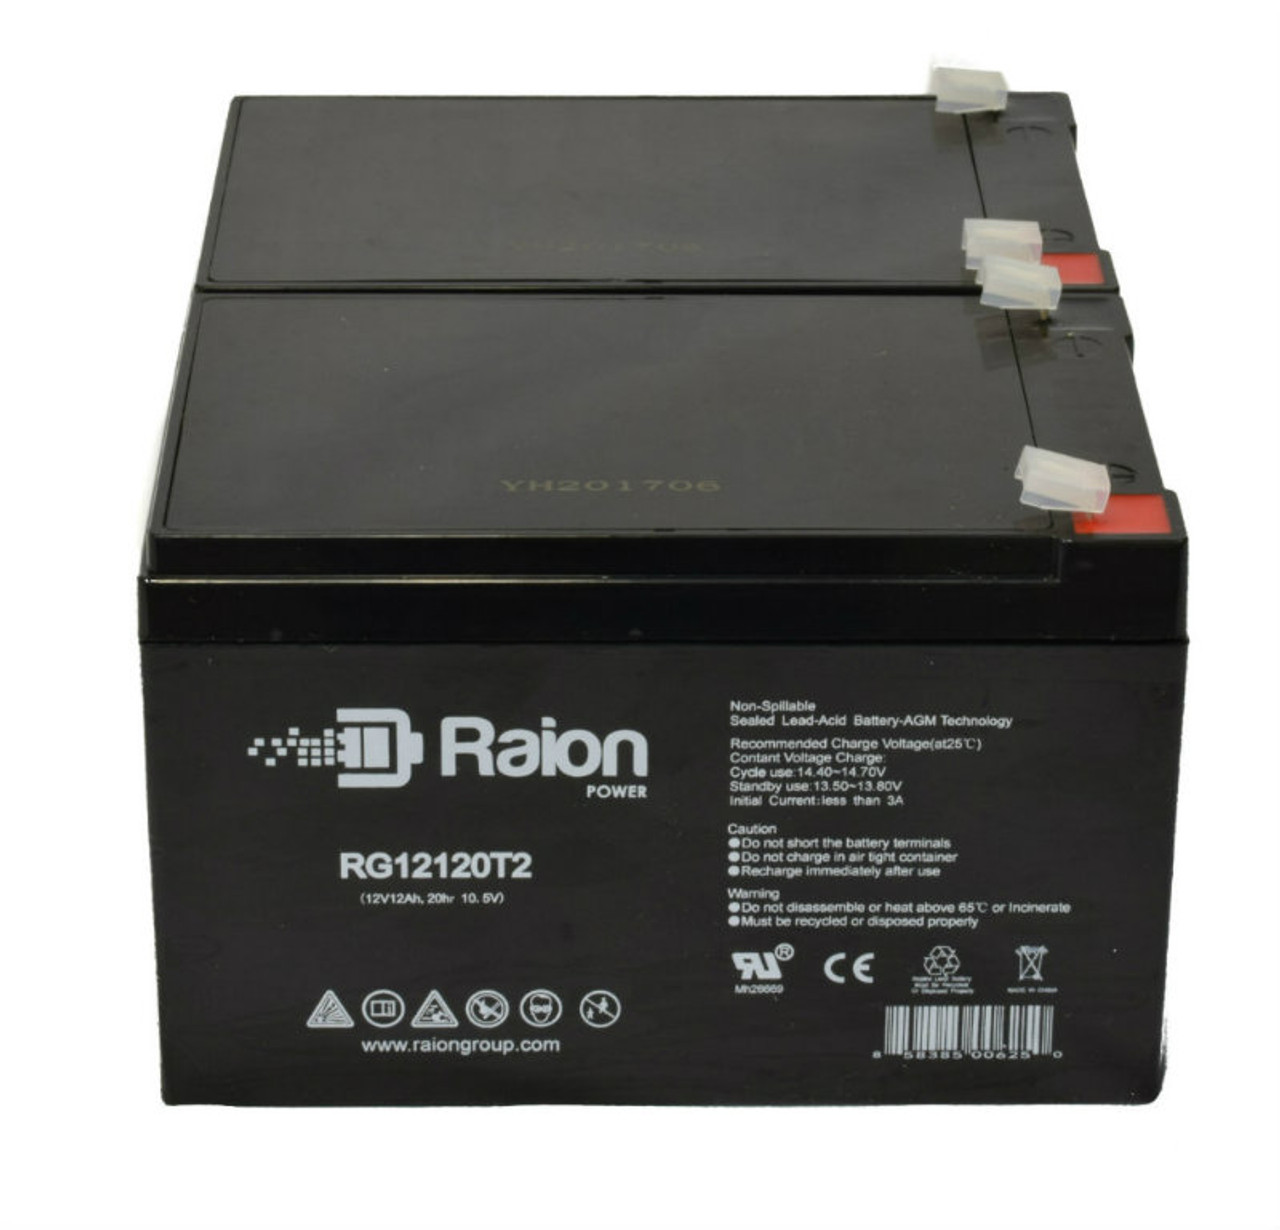 Raion Power RG12120T2 Replacement Battery Set for Electric Mobility UltraLite Fold & Go Powerchair 760 Mobility Scooter - 2 Pack